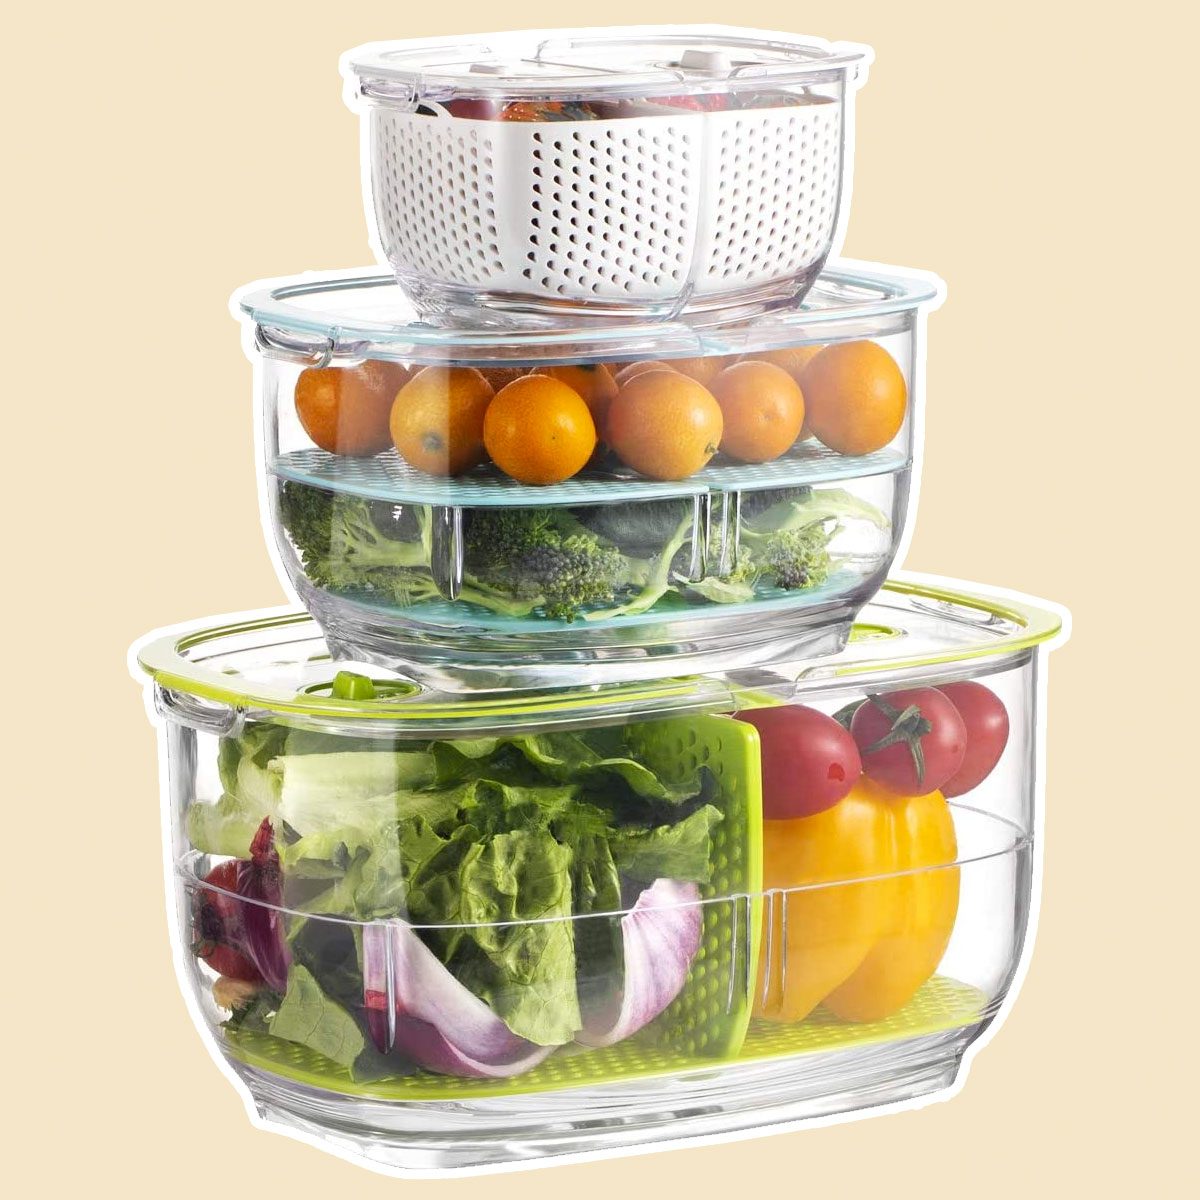 https://www.tasteofhome.com/wp-content/uploads/2020/04/Produce-Veggie-Storage-Containers.jpg?fit=696%2C696